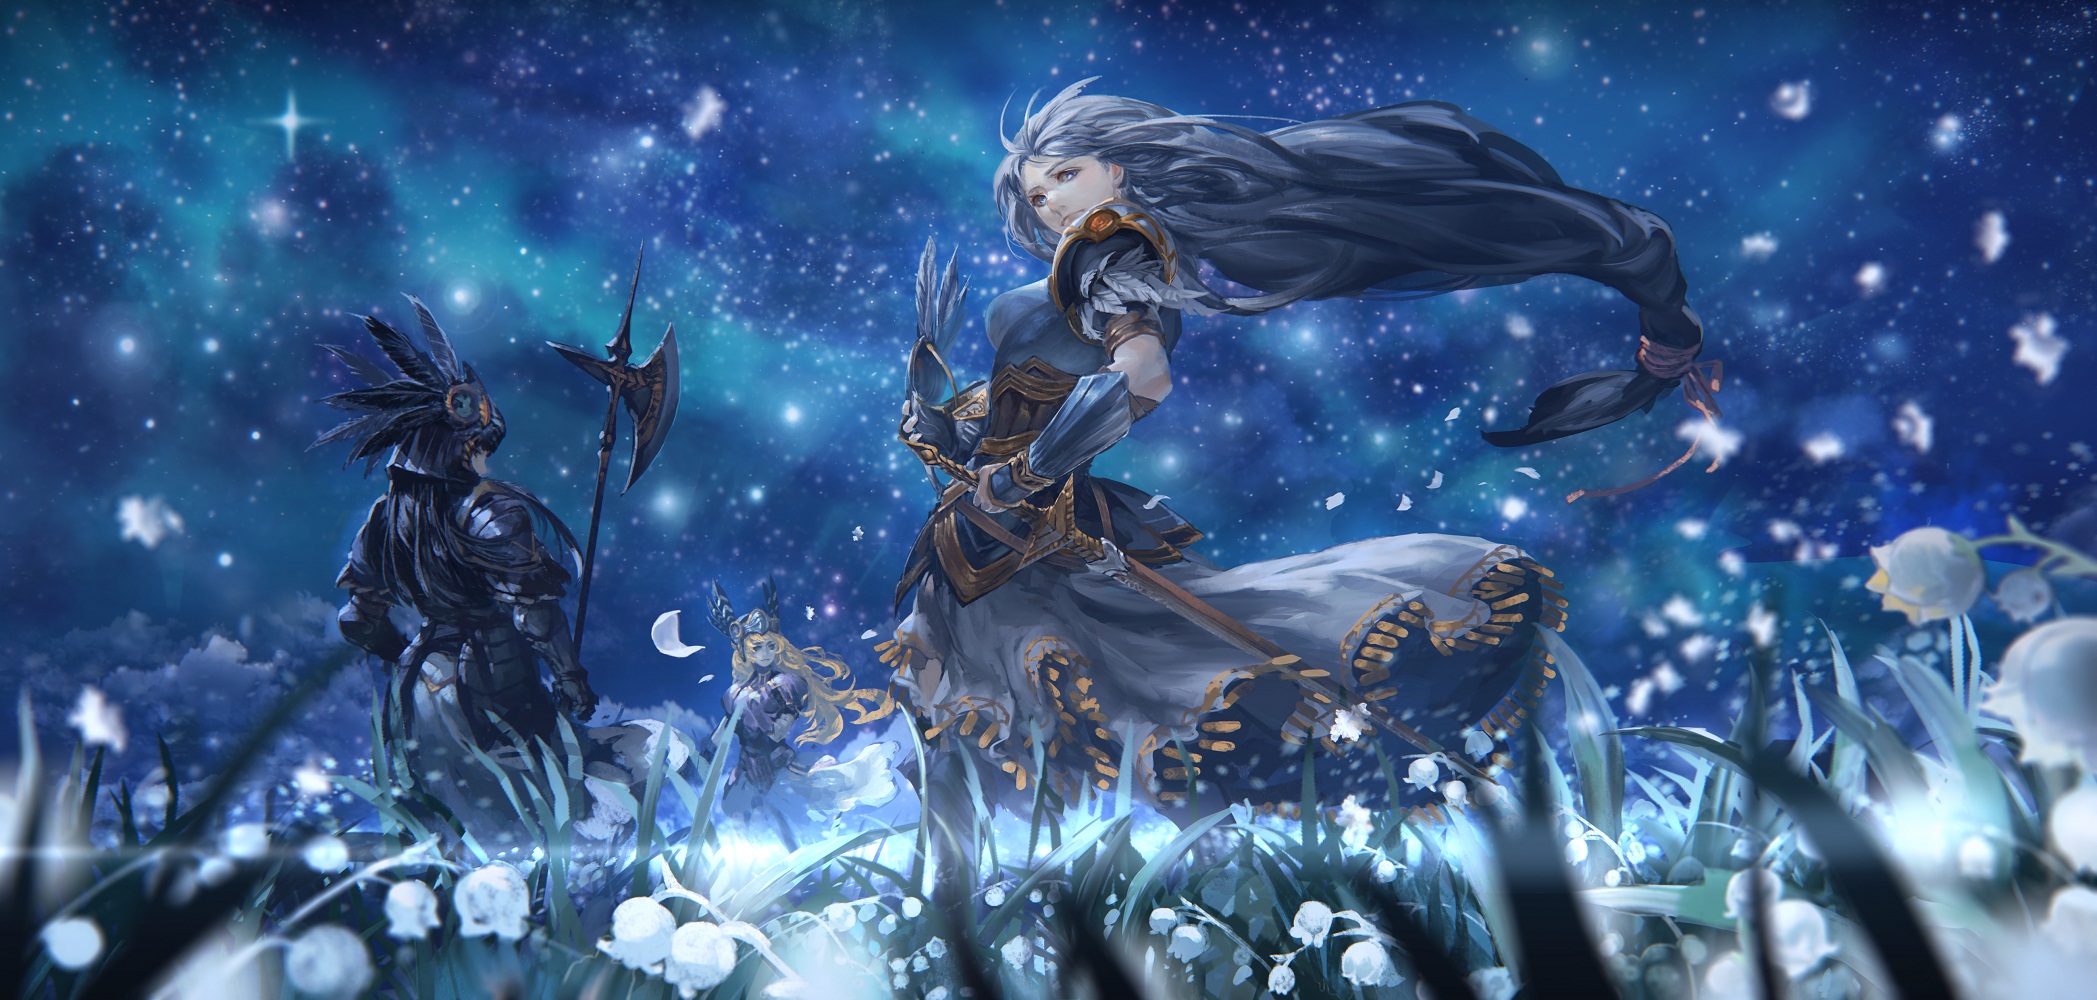 Valkyrie Profile Weapon Wallpaper